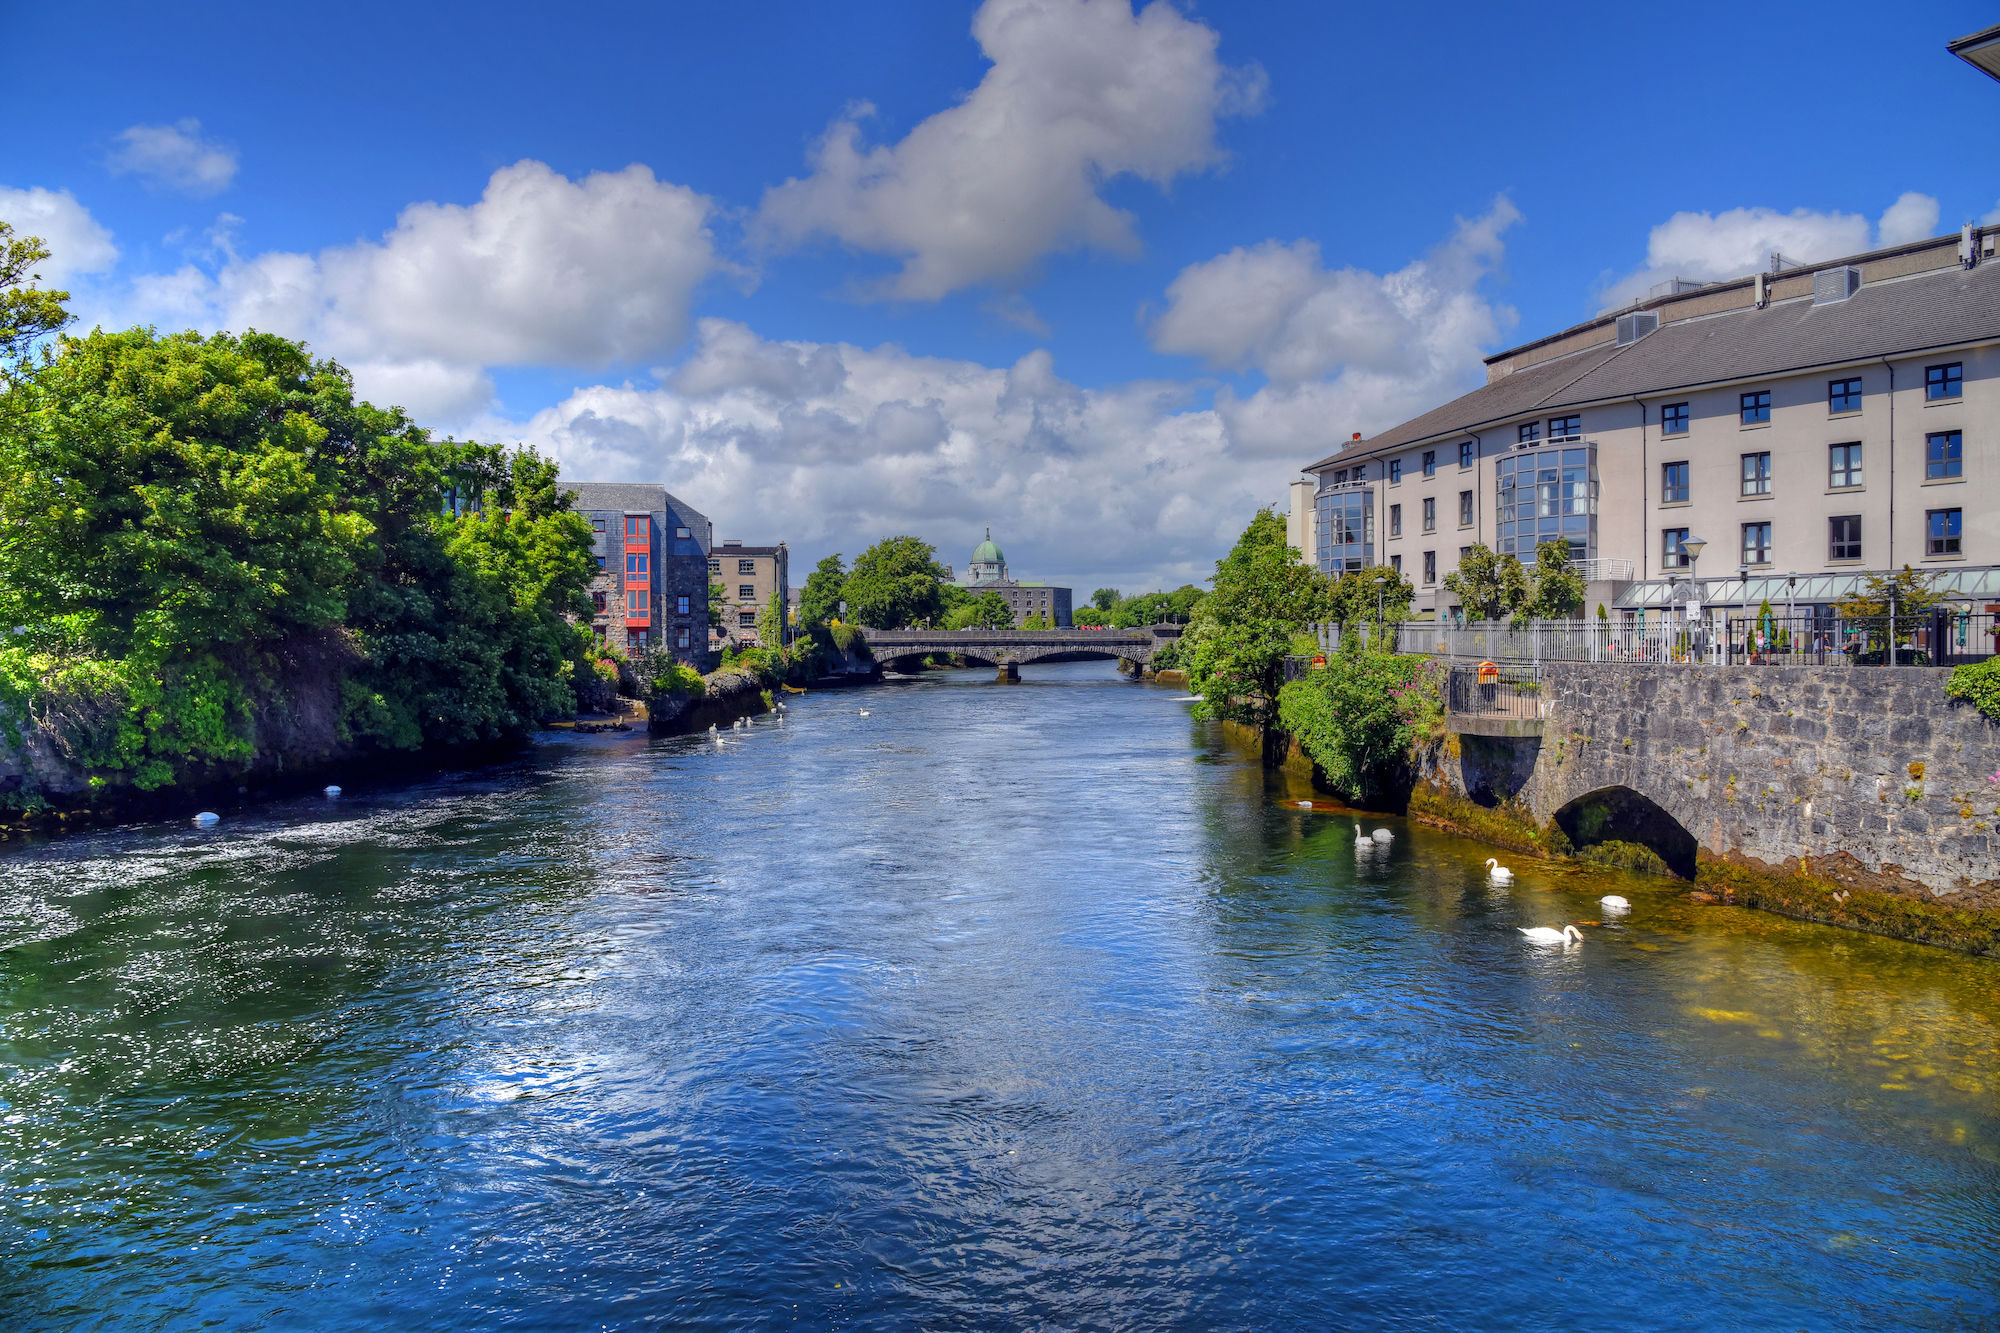 Check out: Galway City, a vibrant oceanside mecca for Irish culture